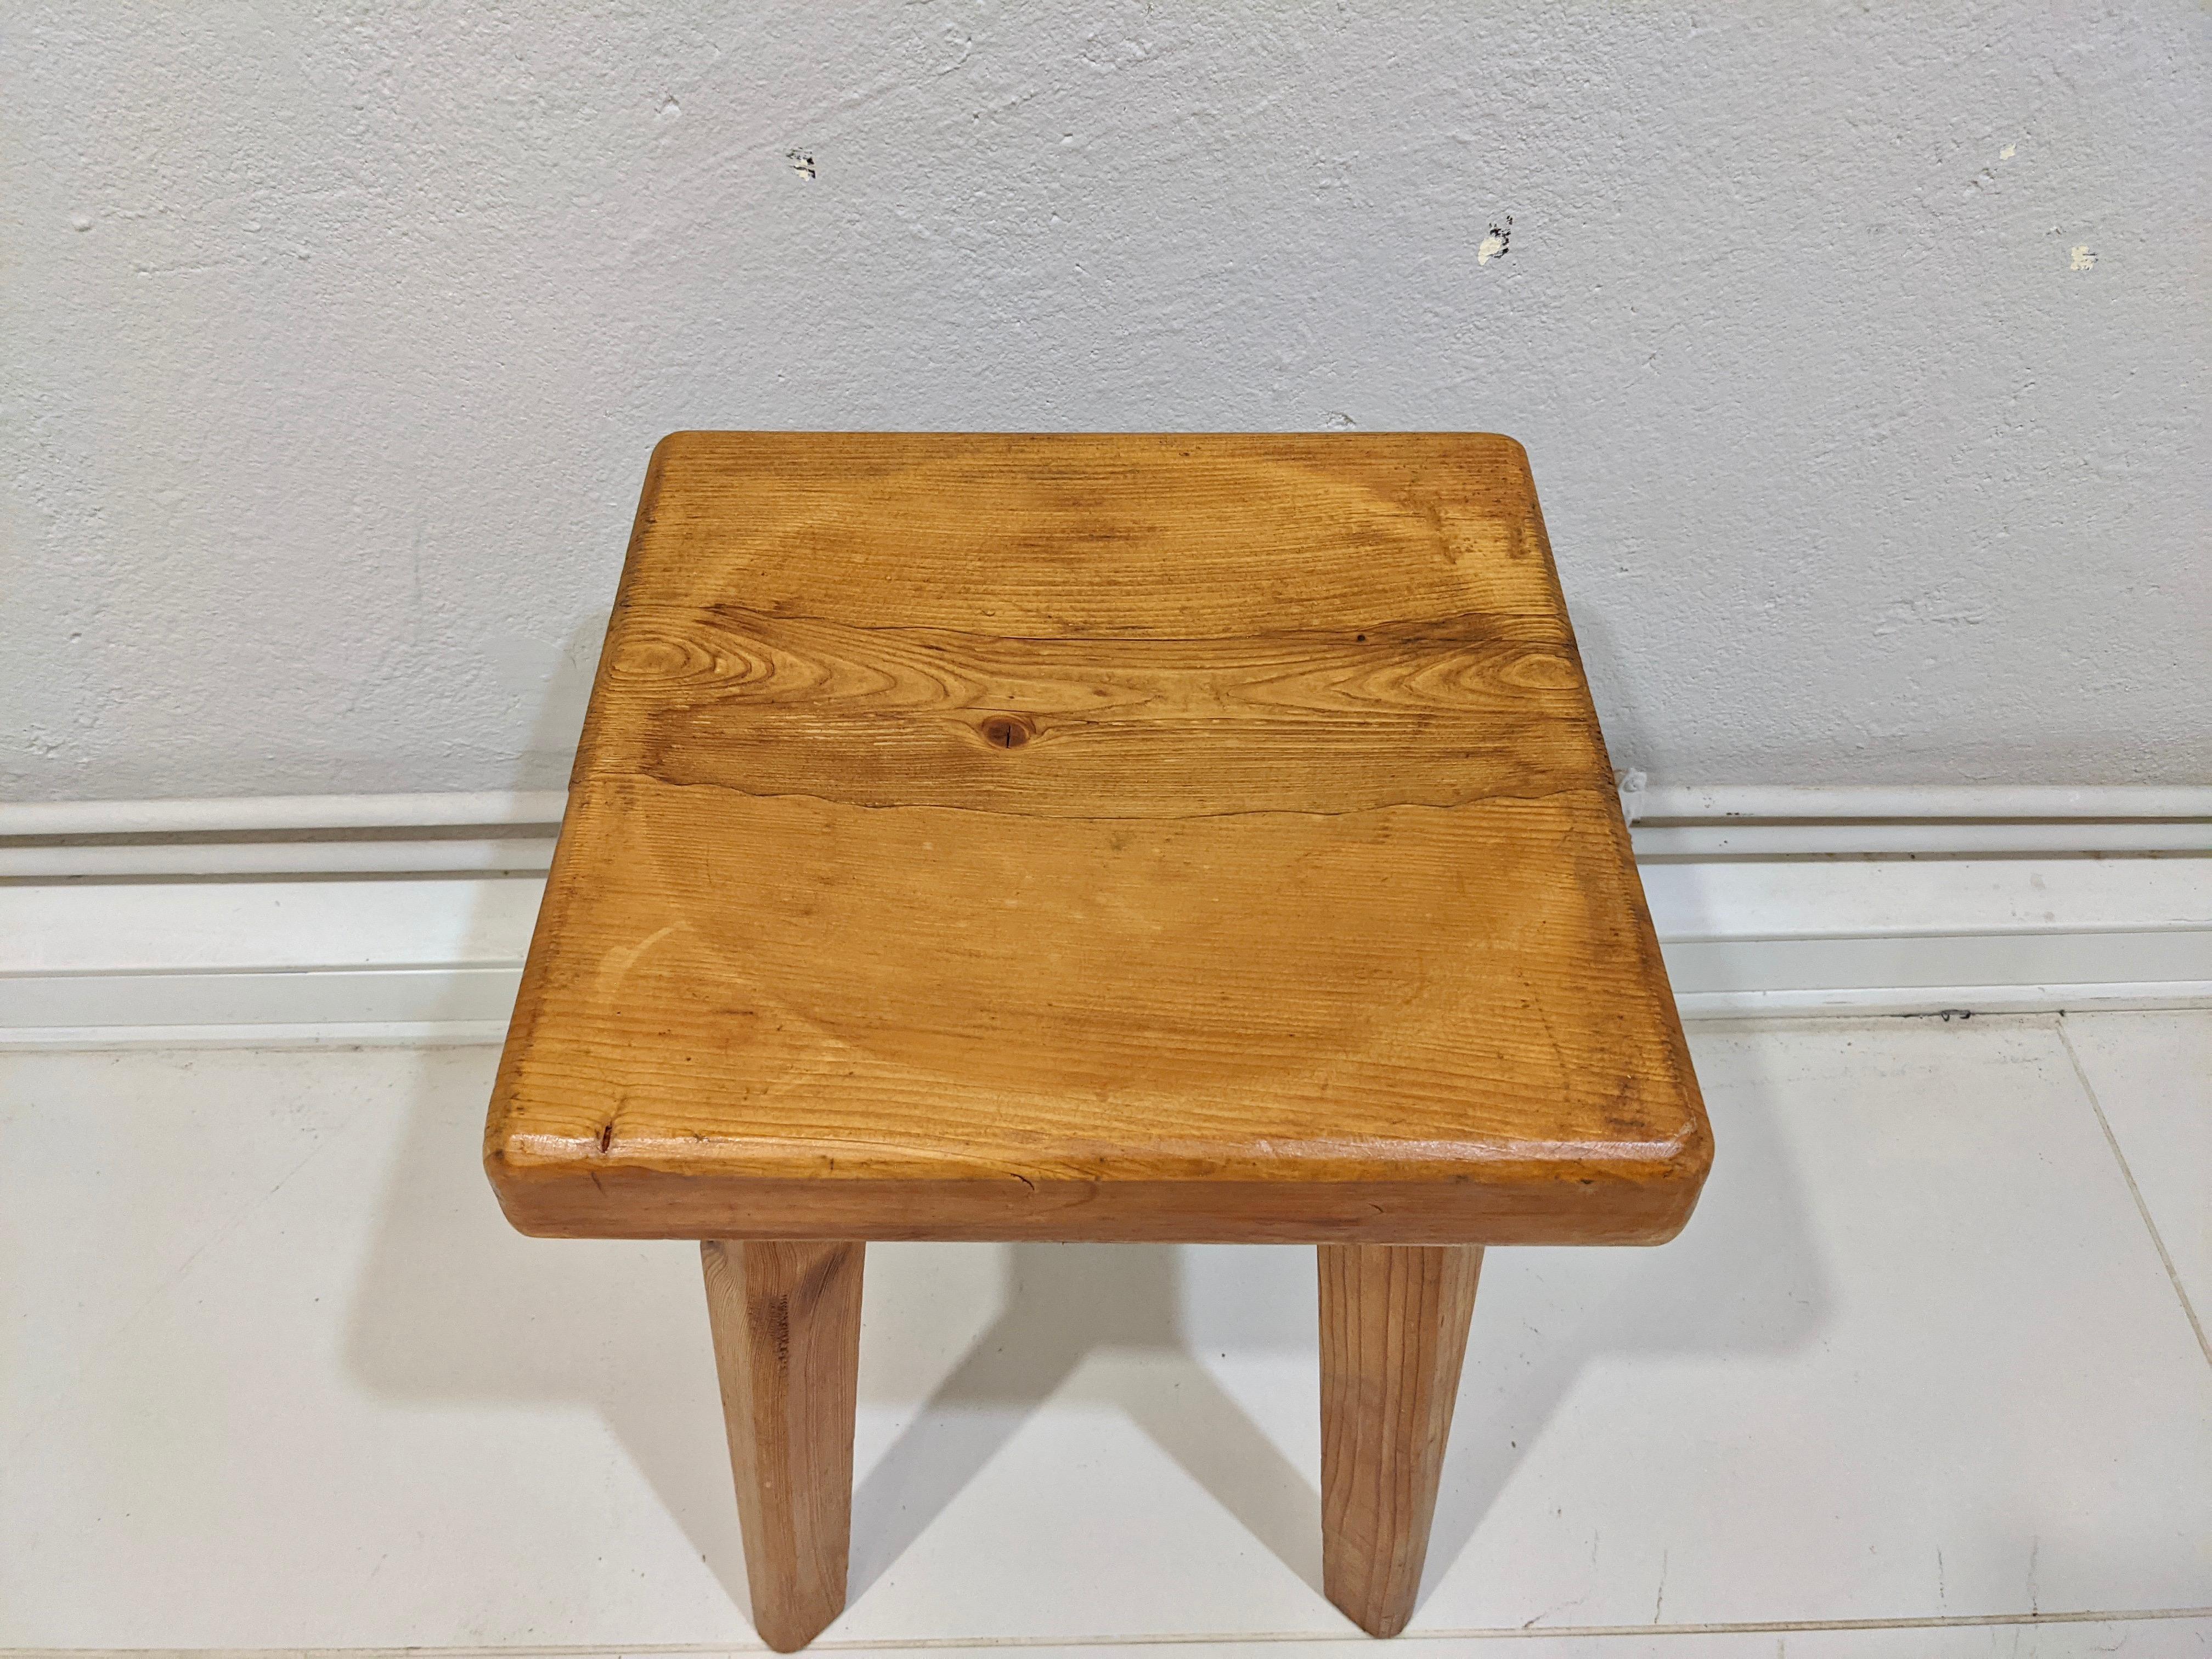 Stool by Christian Durupt for Méribel station. 4 feet. 1960's. Very good condition.
 